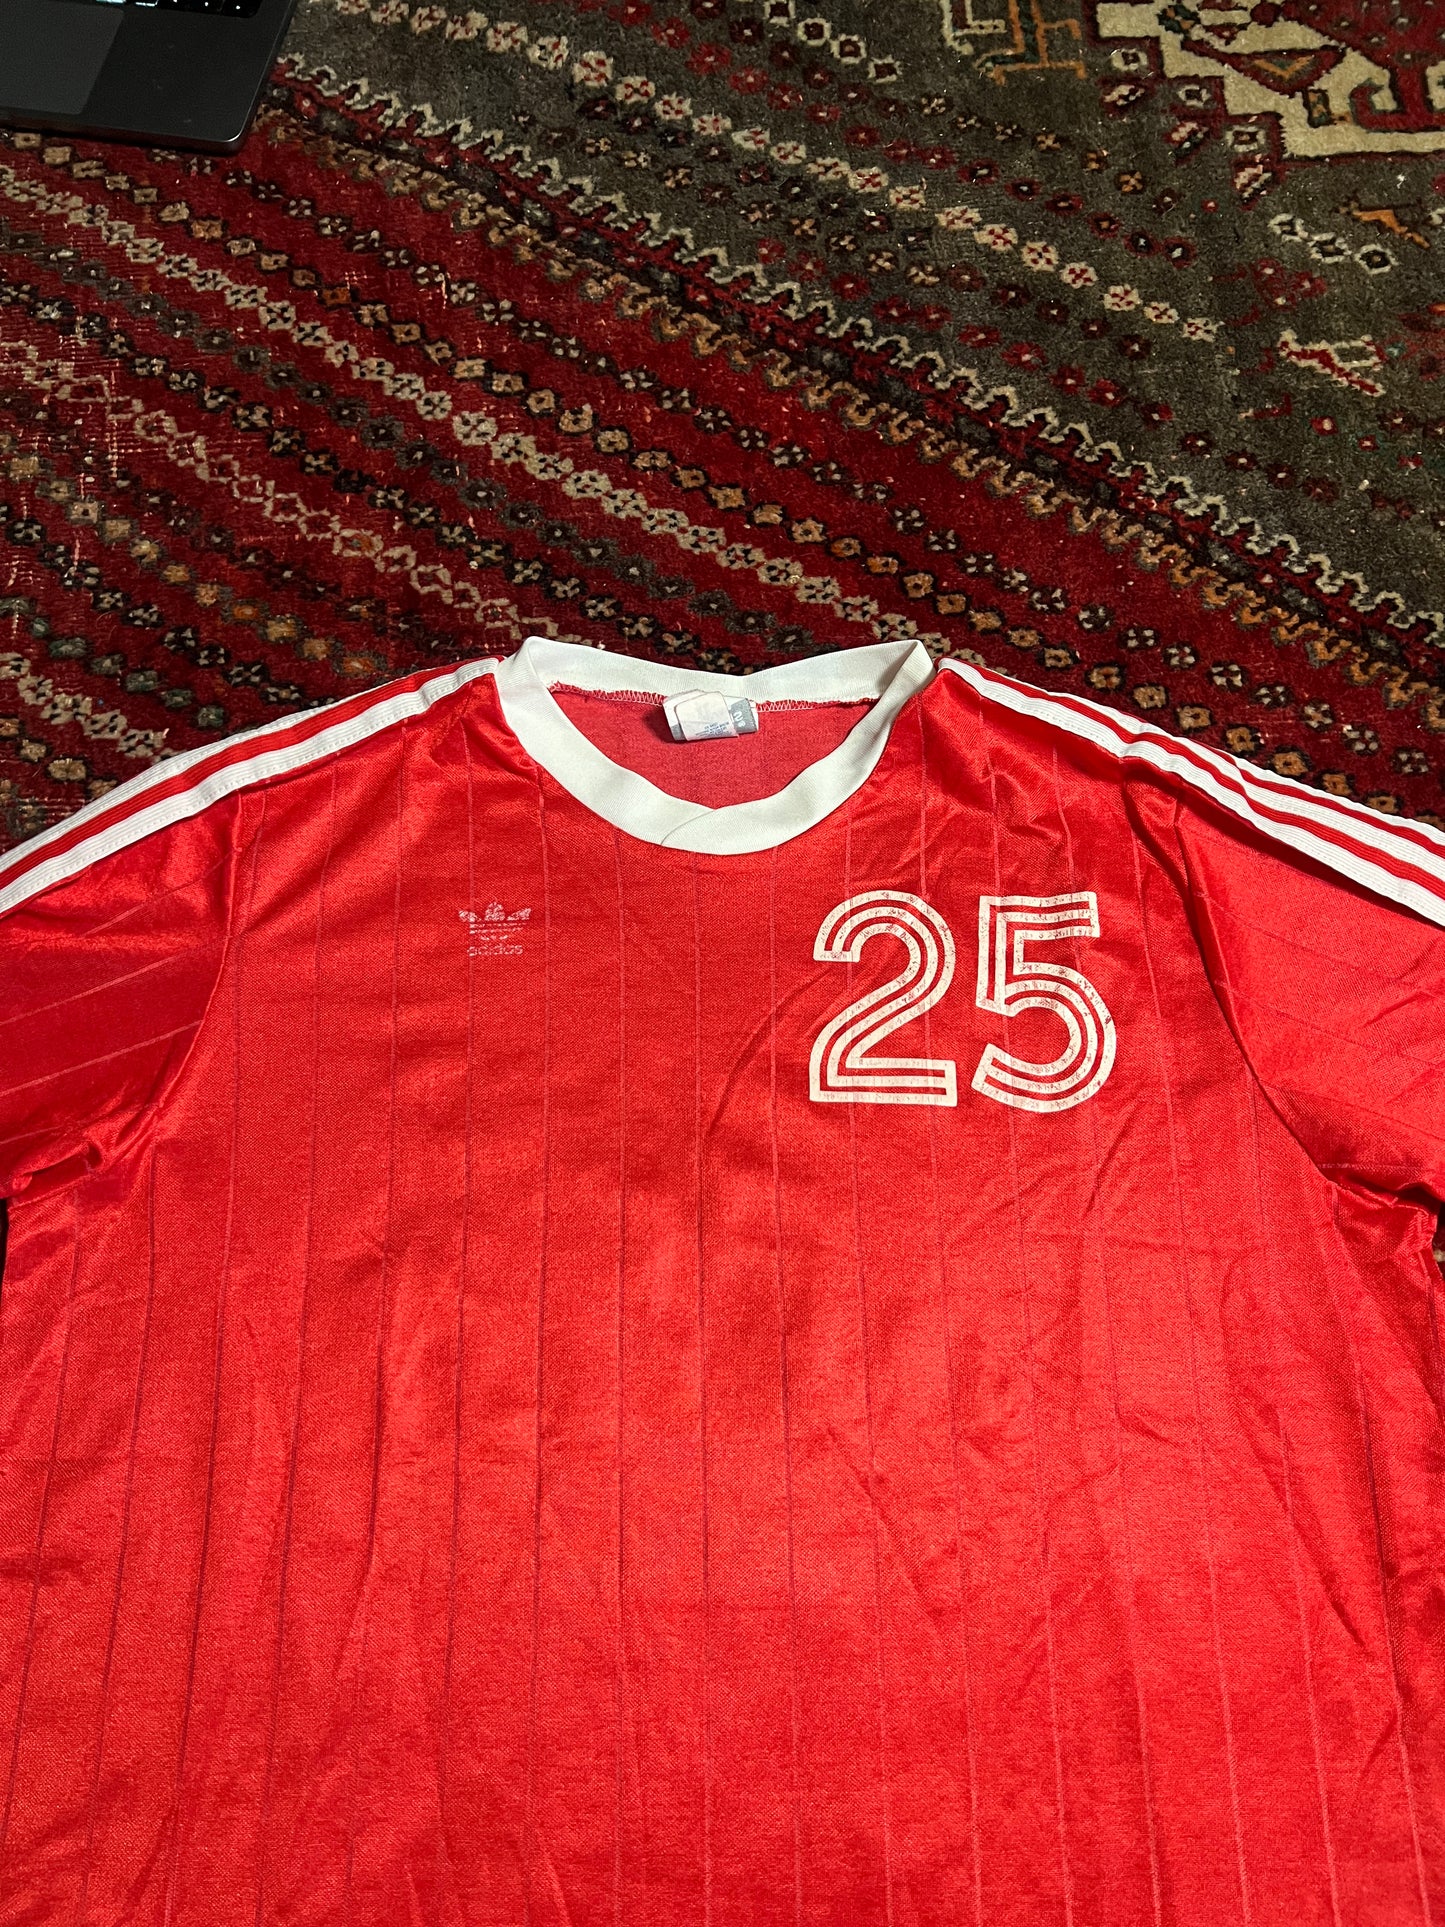 80’s Soccer Jersey Large